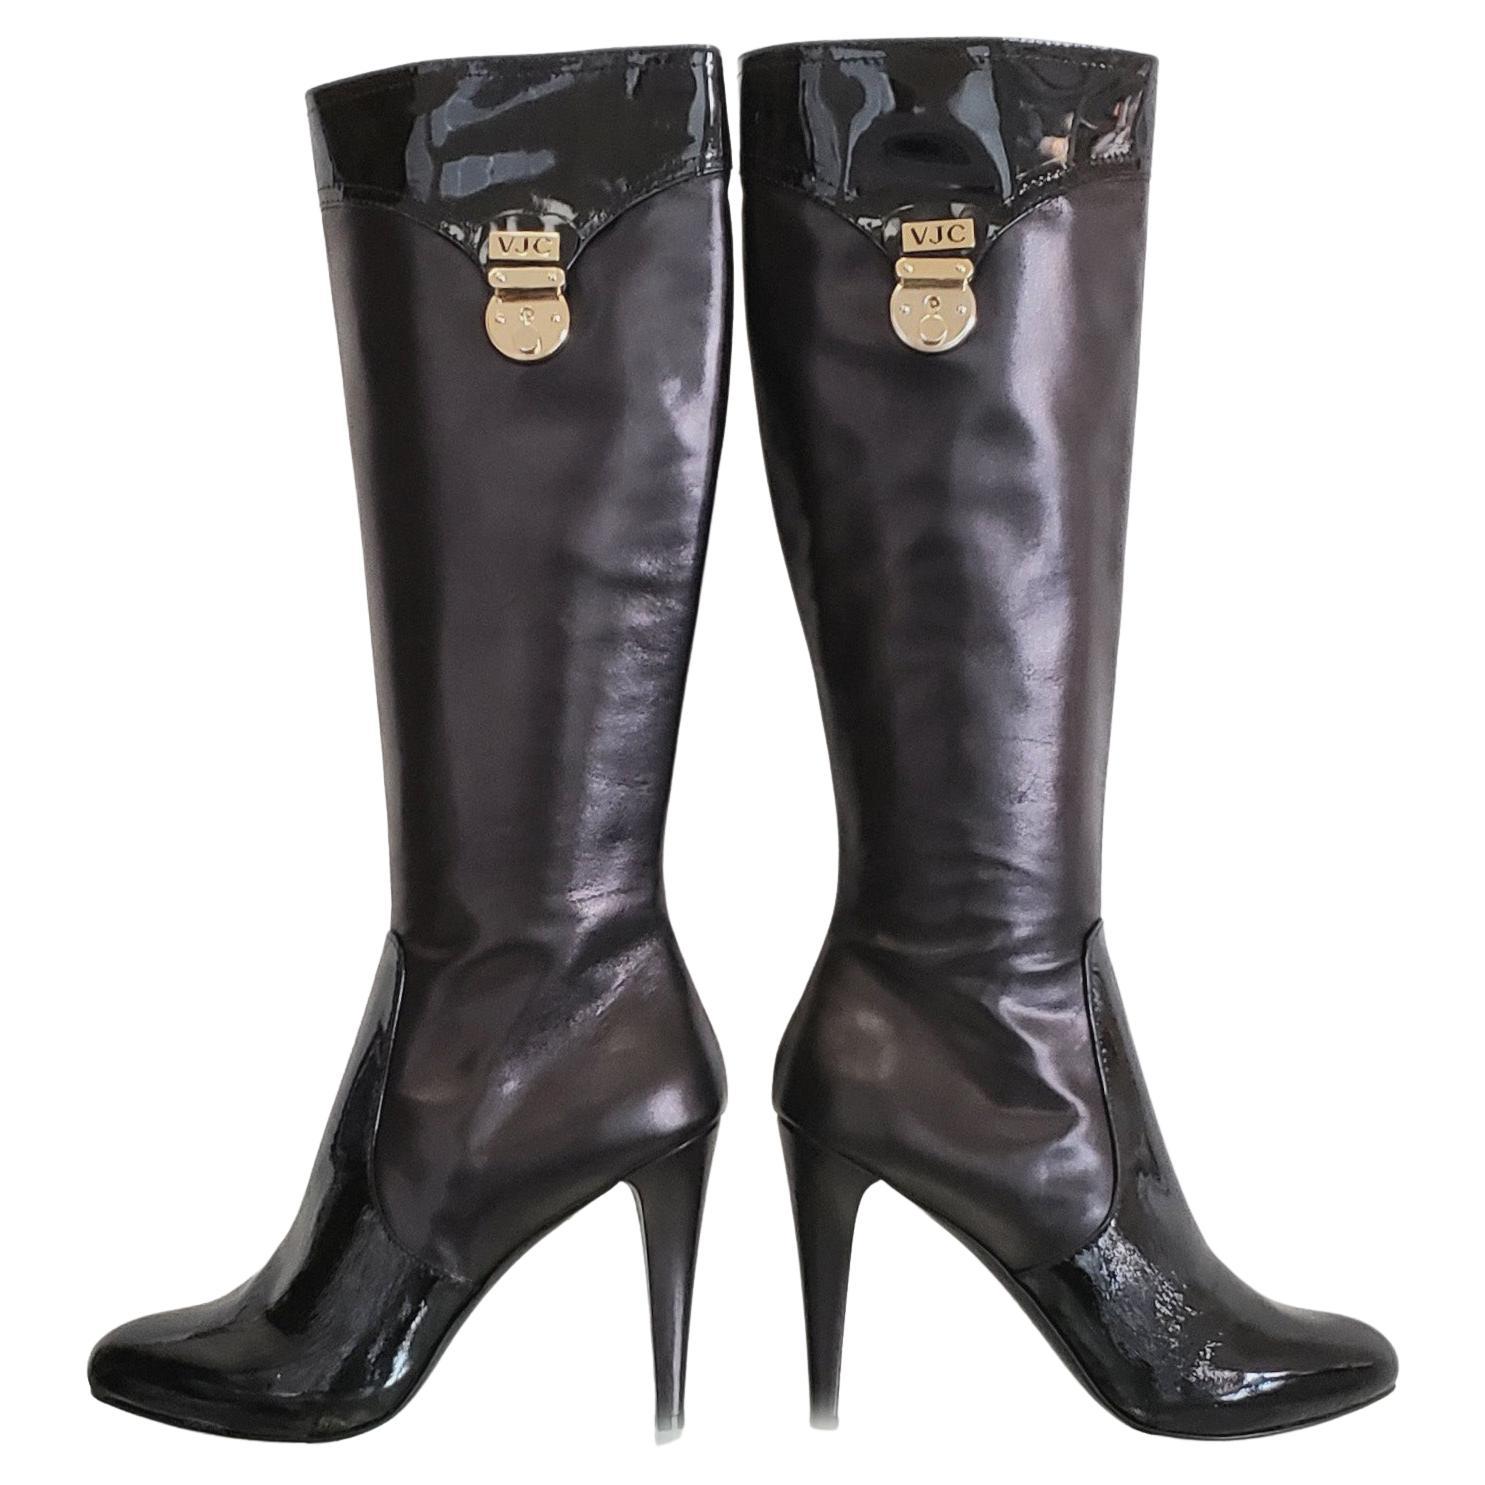 NEW VERSACE VJC BLACK LEATHER BOOTS with PATENT LEATHER INSERTS  39 - 9